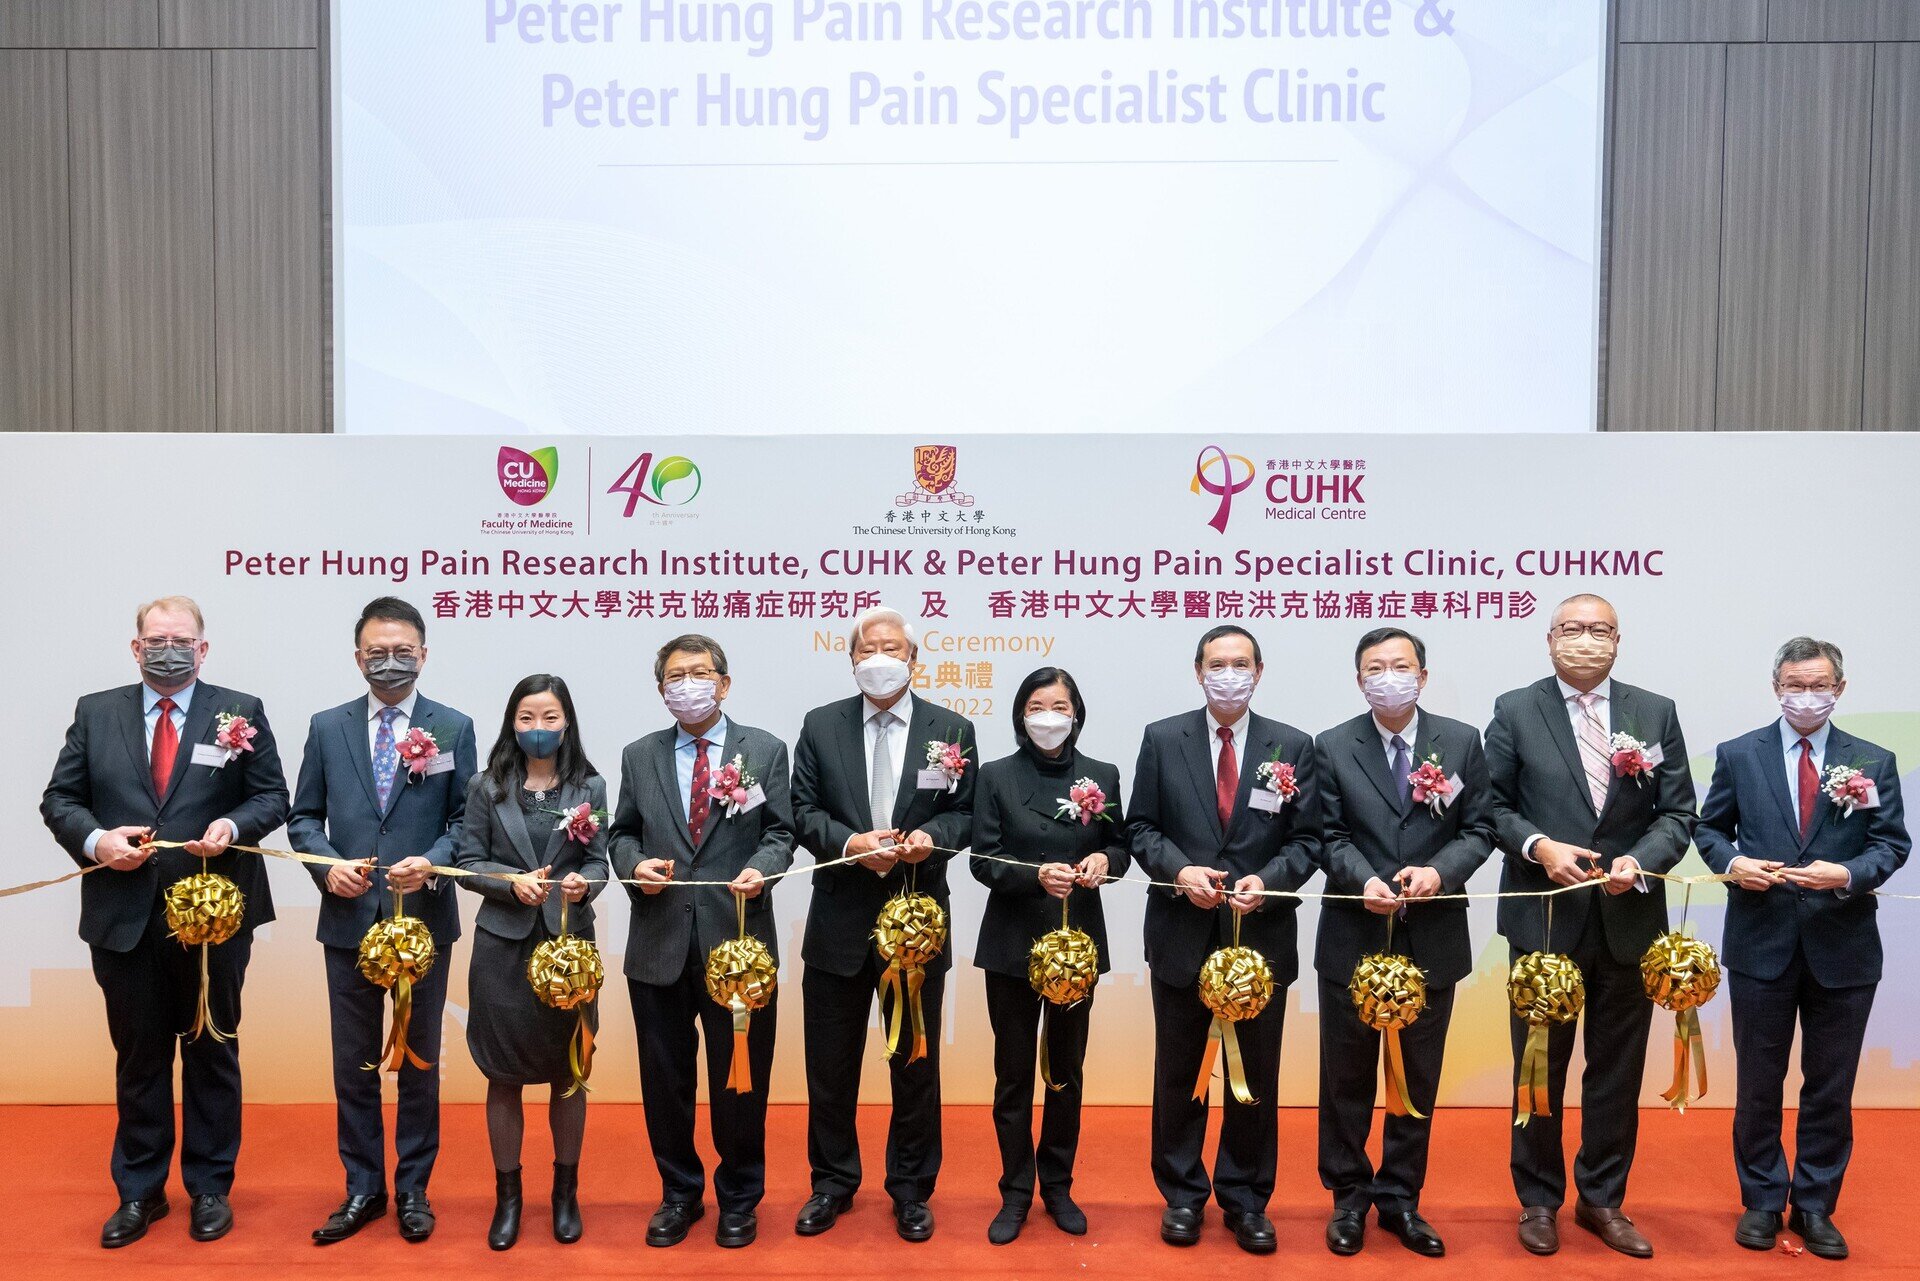 CUHK hosts the naming ceremony of the Peter Hung Pain Research Institute and Peter Hung Pain Specialist Clinic 